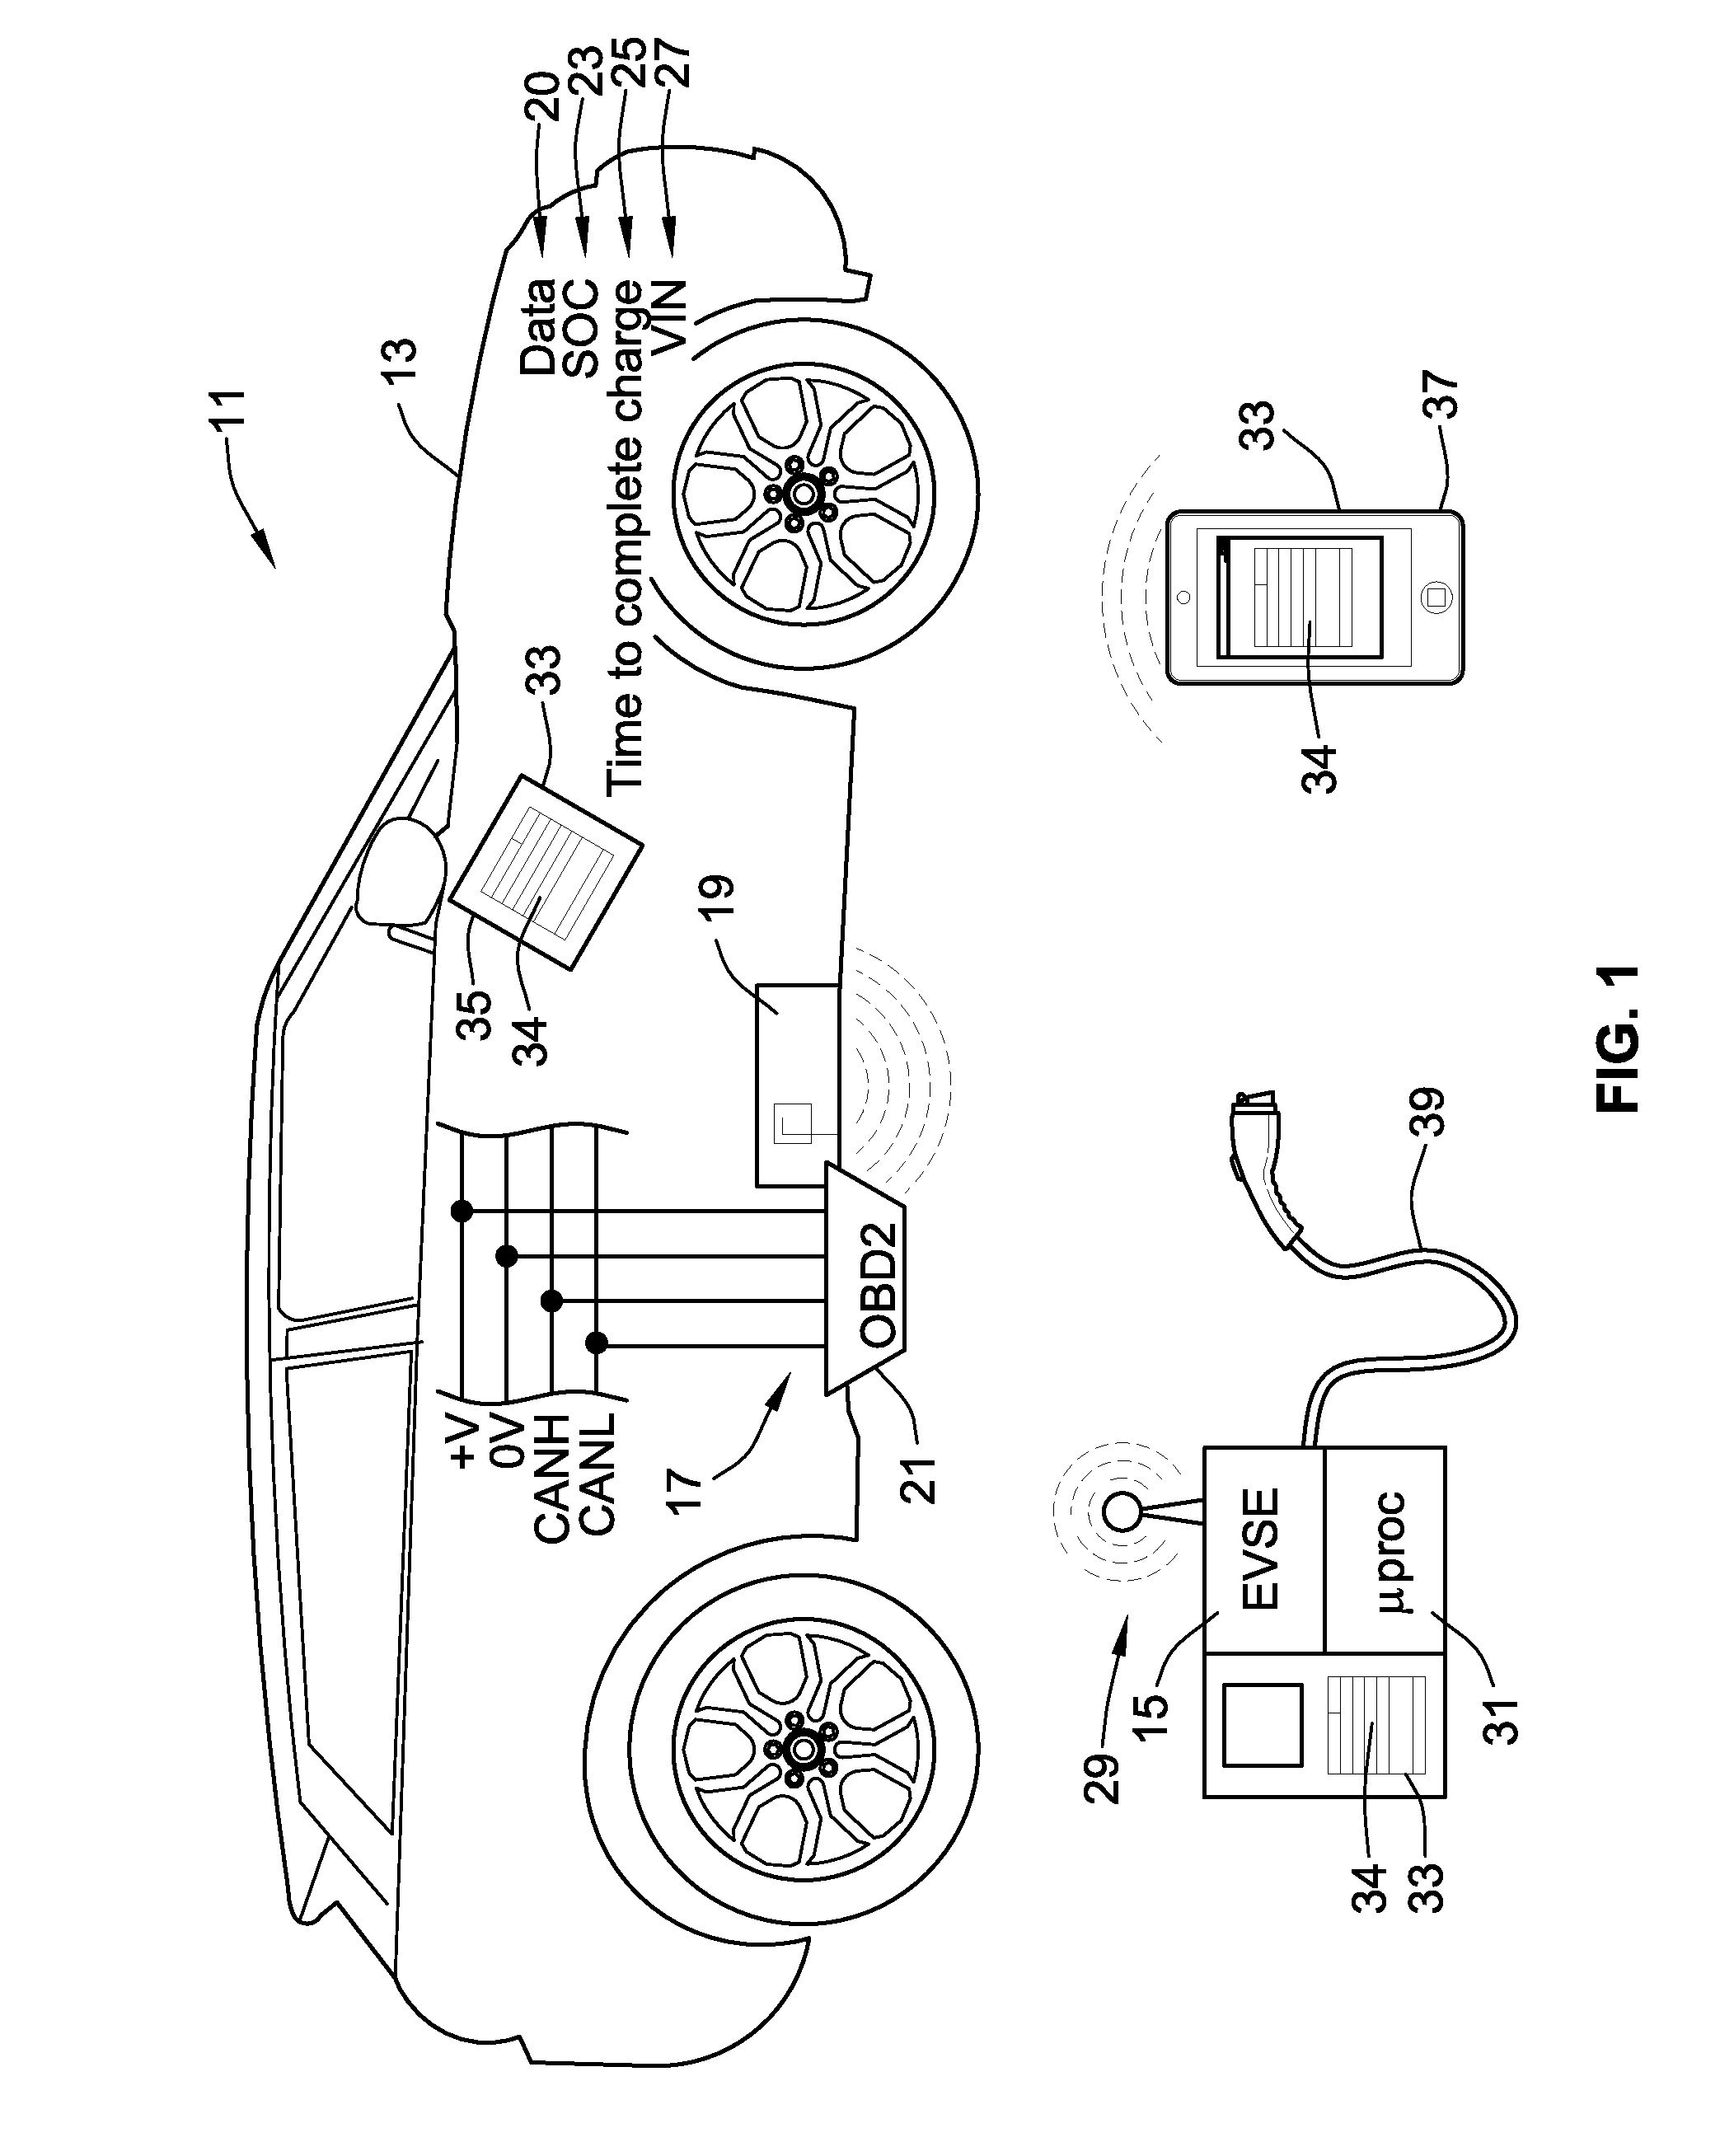 Direct Communications System for Charging Electric Vehicles